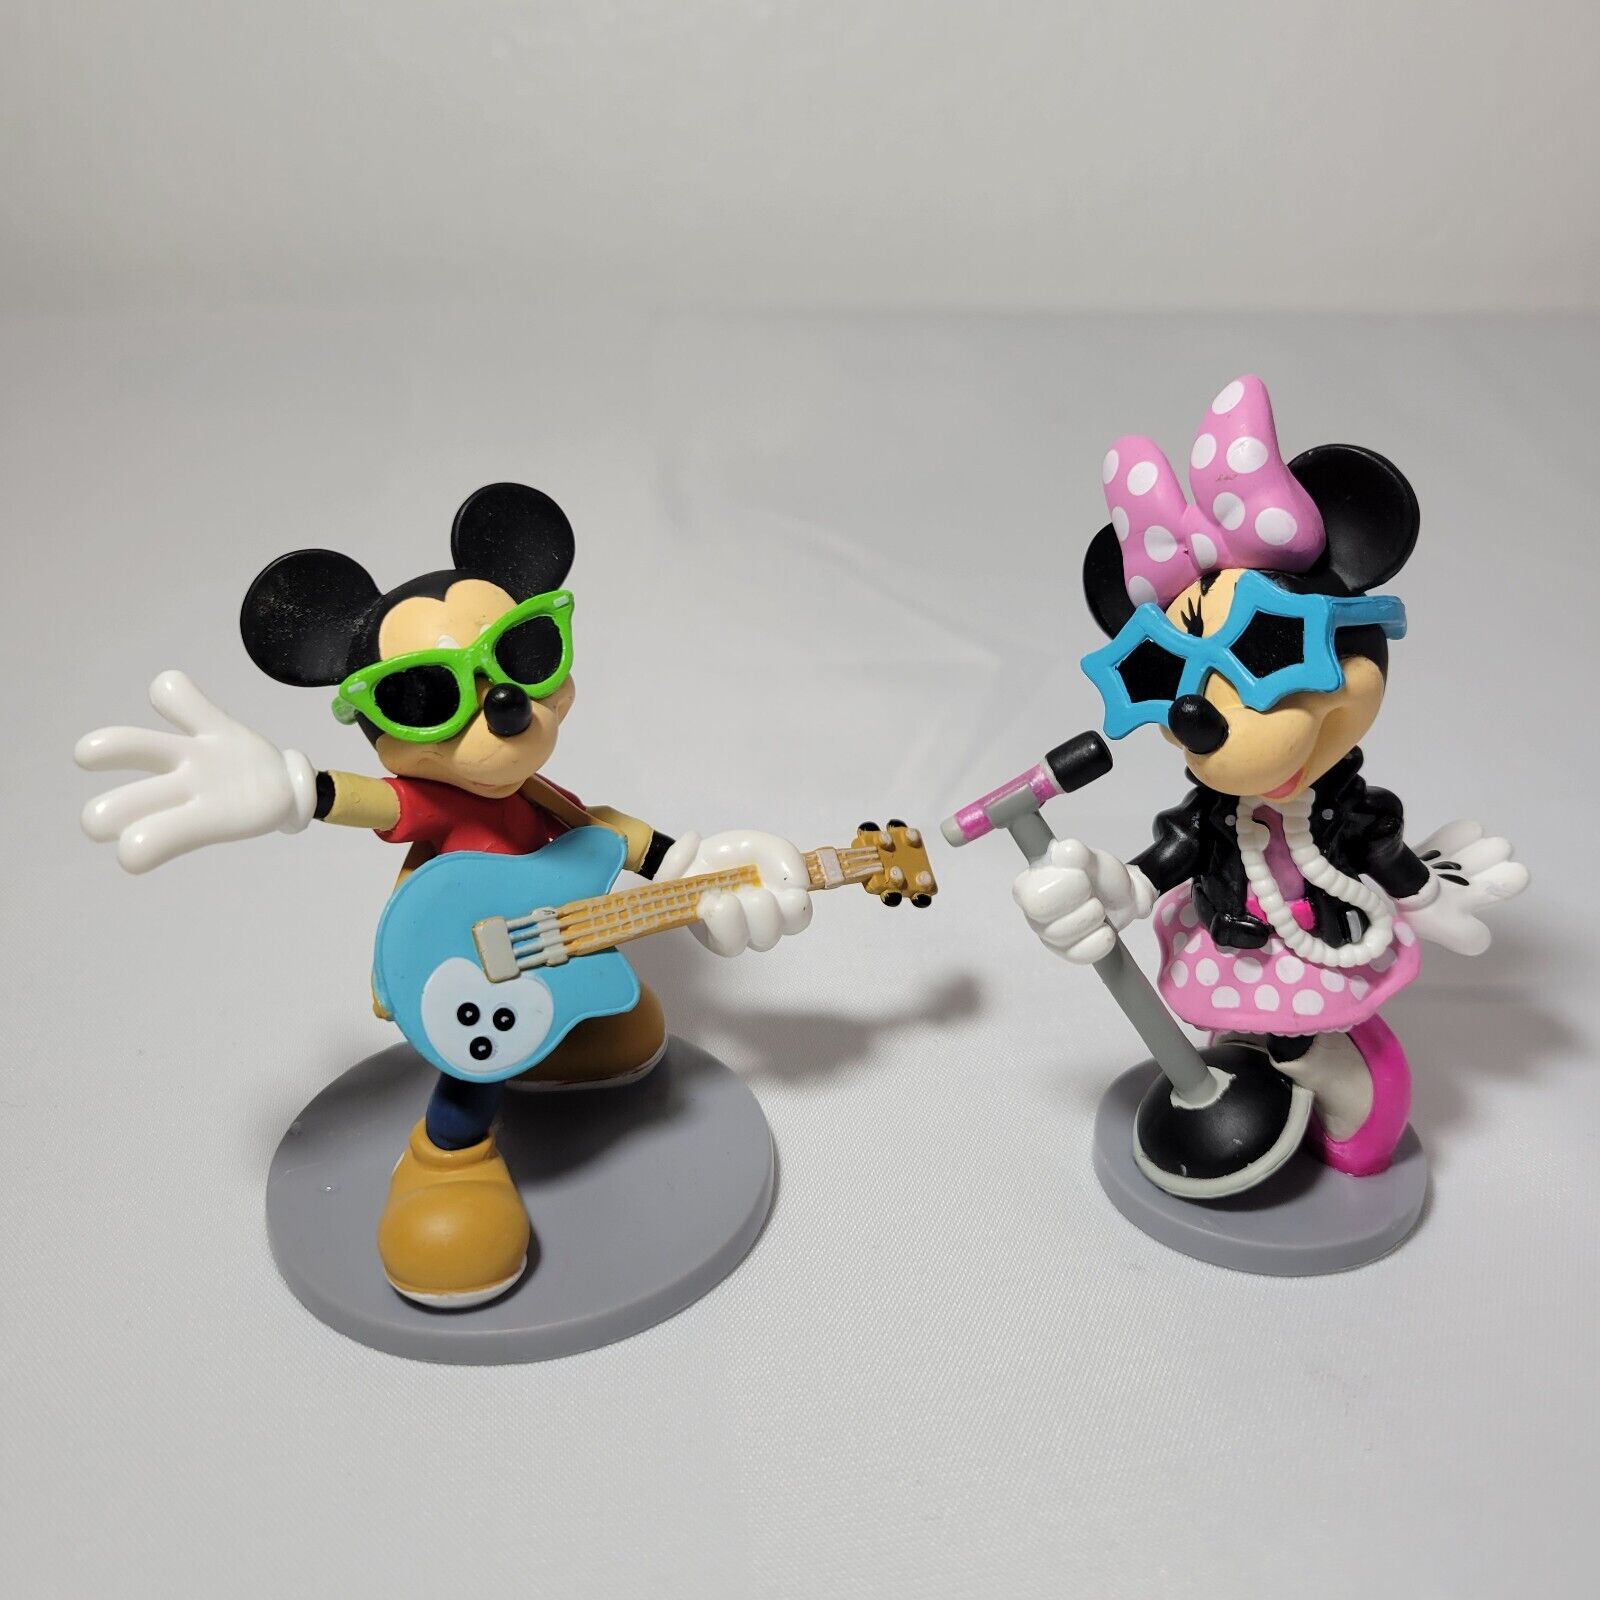 Mickey & Minnie Mouse as Rock Stars/Pop Stars Singers with Guitar